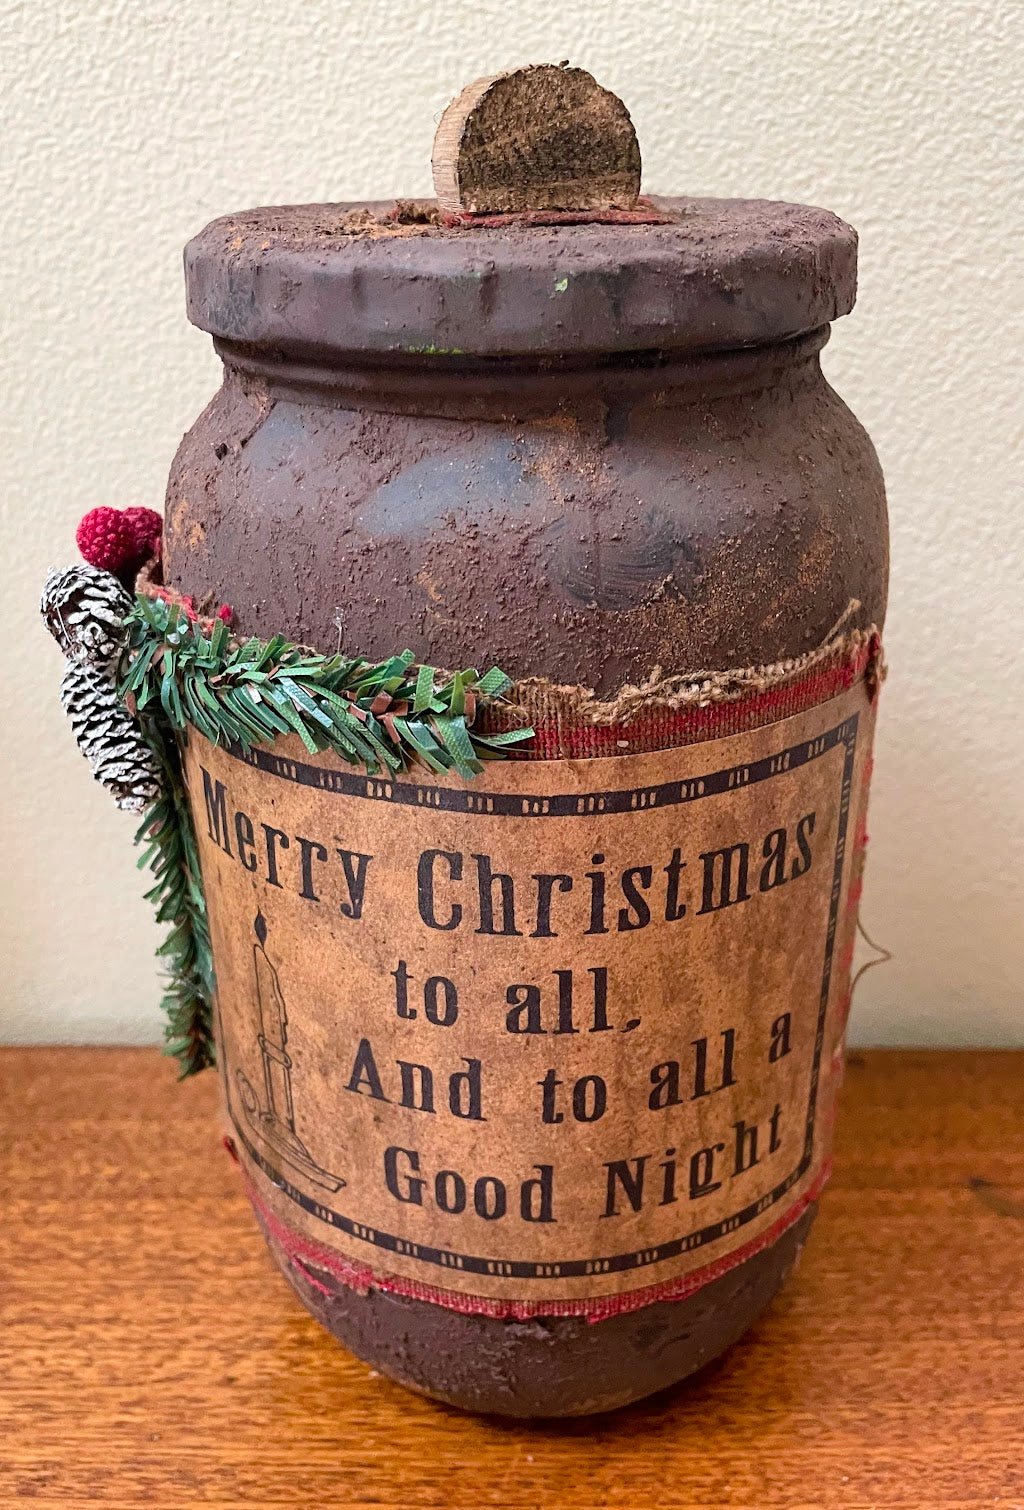 Primitive Colonial Handcrafted And To All A Goodnight Christmas Jar 7&quot; - The Primitive Pineapple Collection